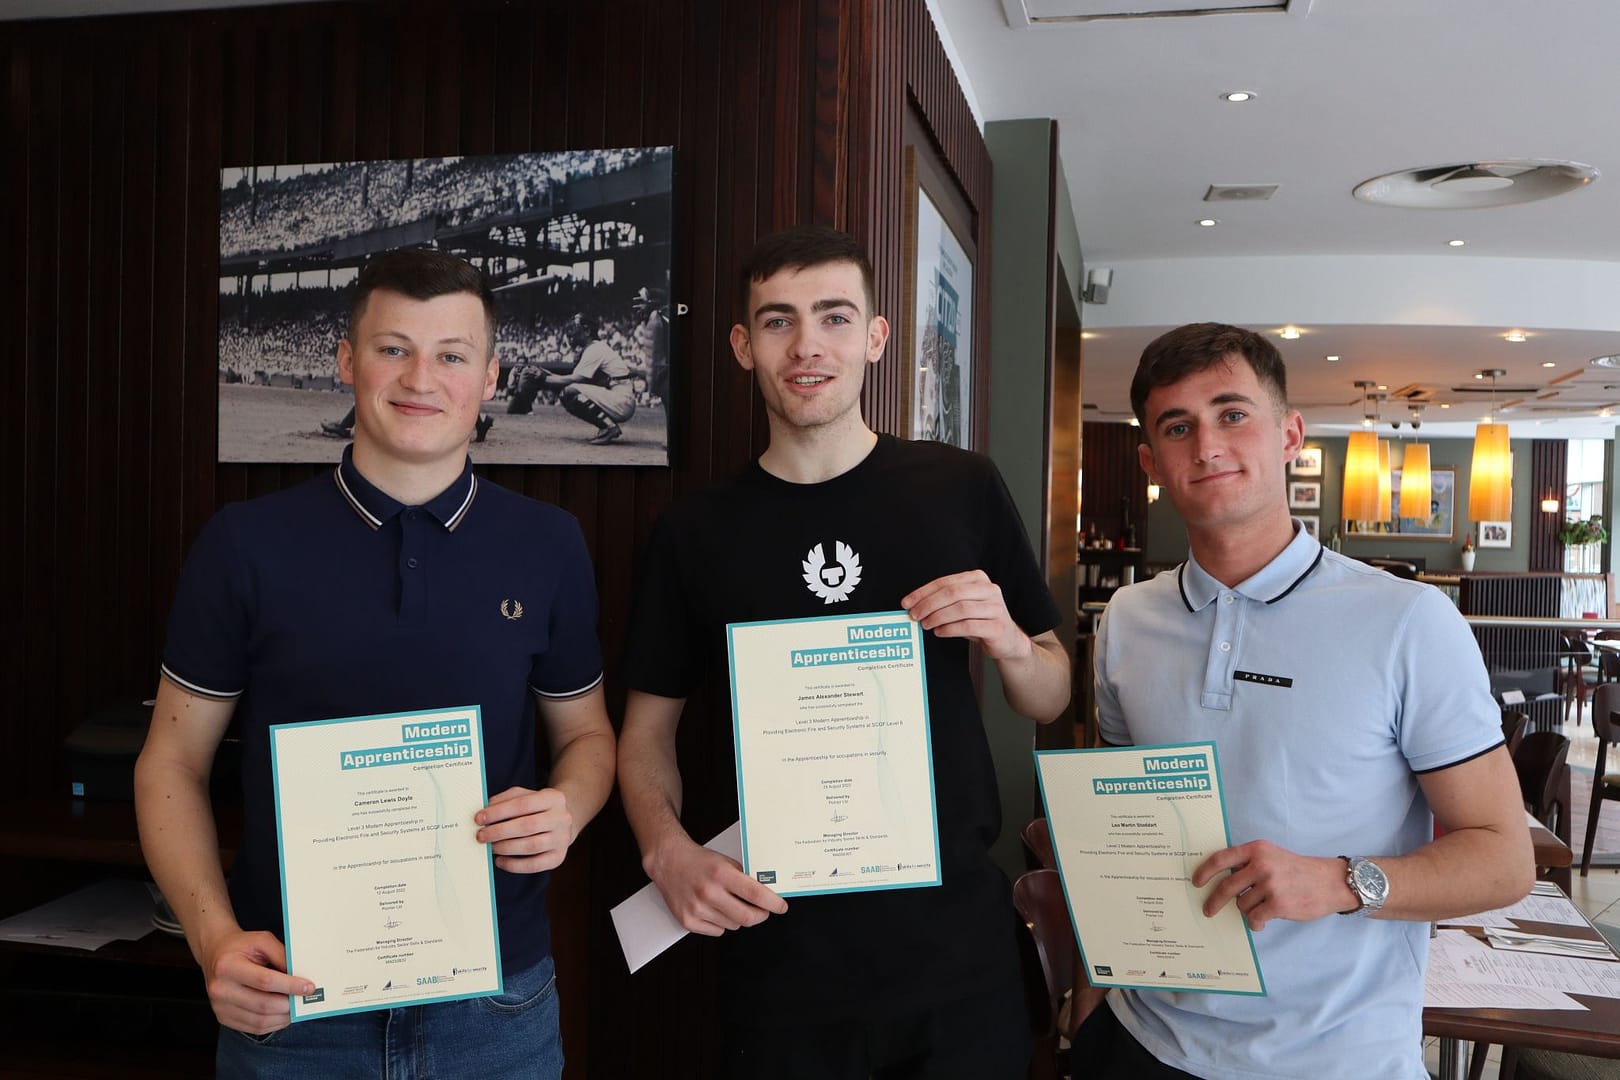 Three apprentices holding certificates in a restaurant setting